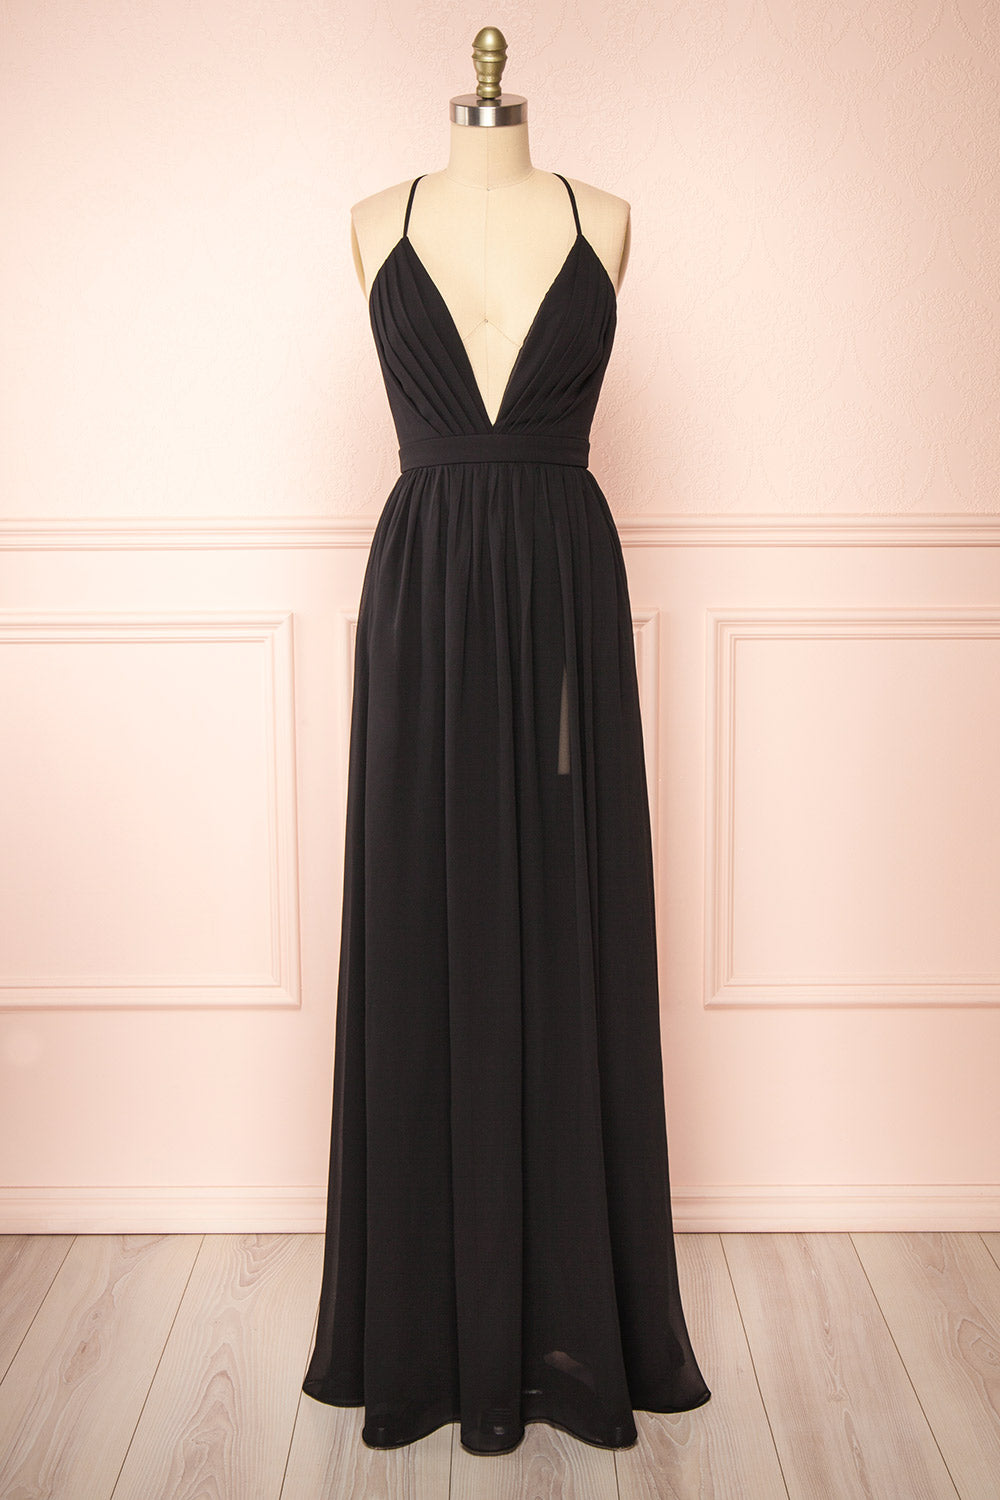 Haley Black Chiffon Gown with Plunging Neckline | Boutique 1861 front view